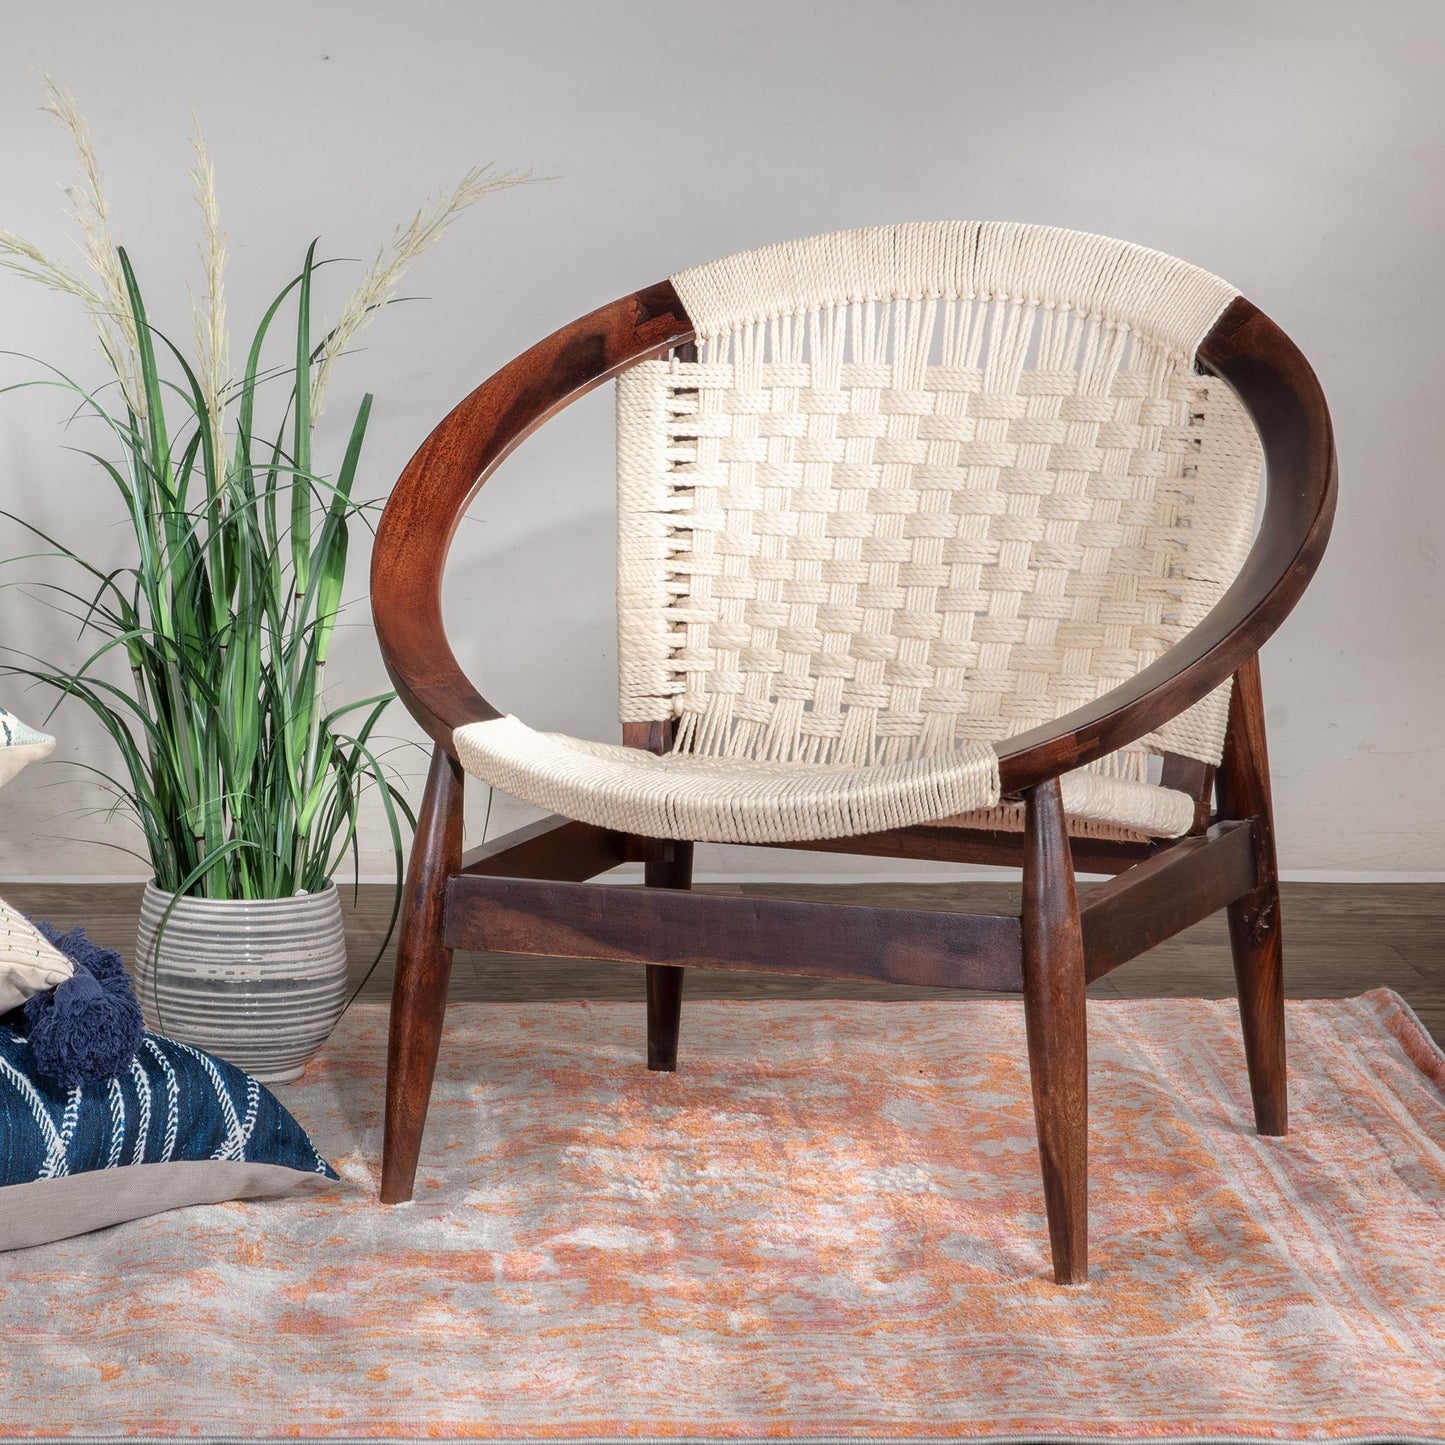 Handwoven Rope Papasan Darkwash Barrel Accent Chair Base - Sideboards and Things Brand_LOOMLAN Home, Color_Brown, Color_White, Game Room, Legs Material_Wood, Materials_Rope, Product Type_Occasional Chair, Upholstery Type_Rope, Wood Species_Mango